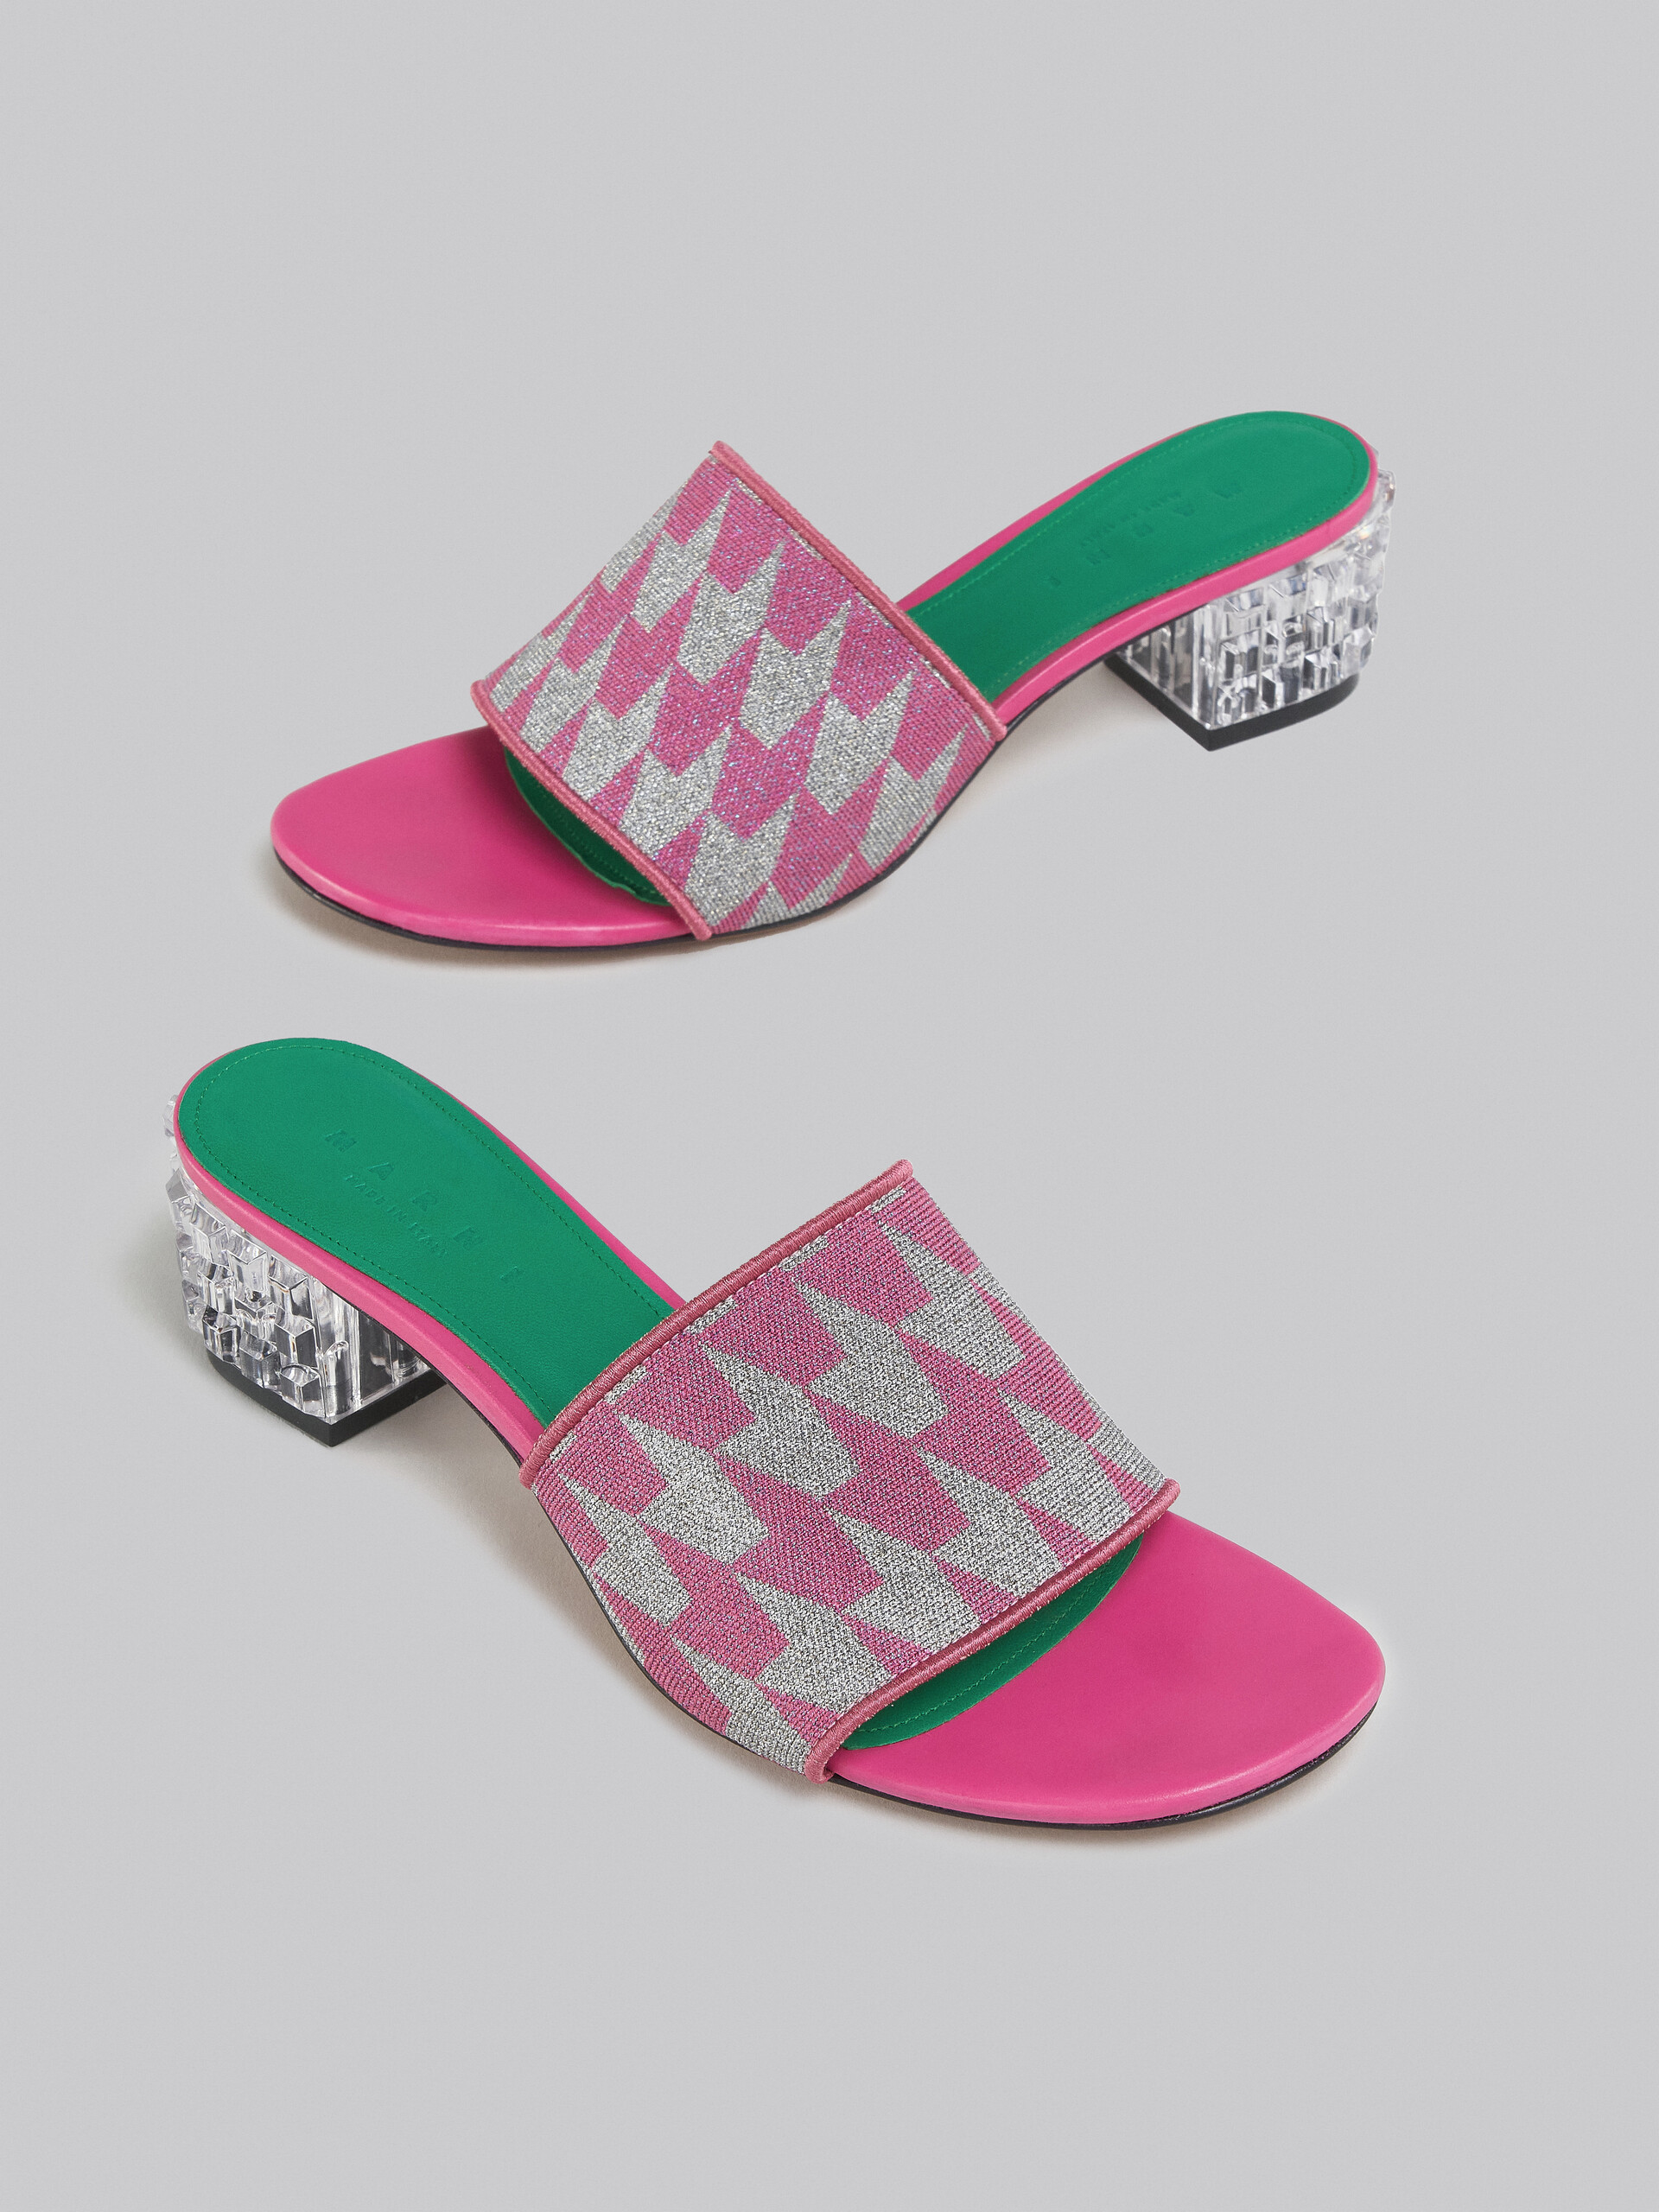 Lurex pink and silver sabot with houndstooth motif - Sandals - Image 5